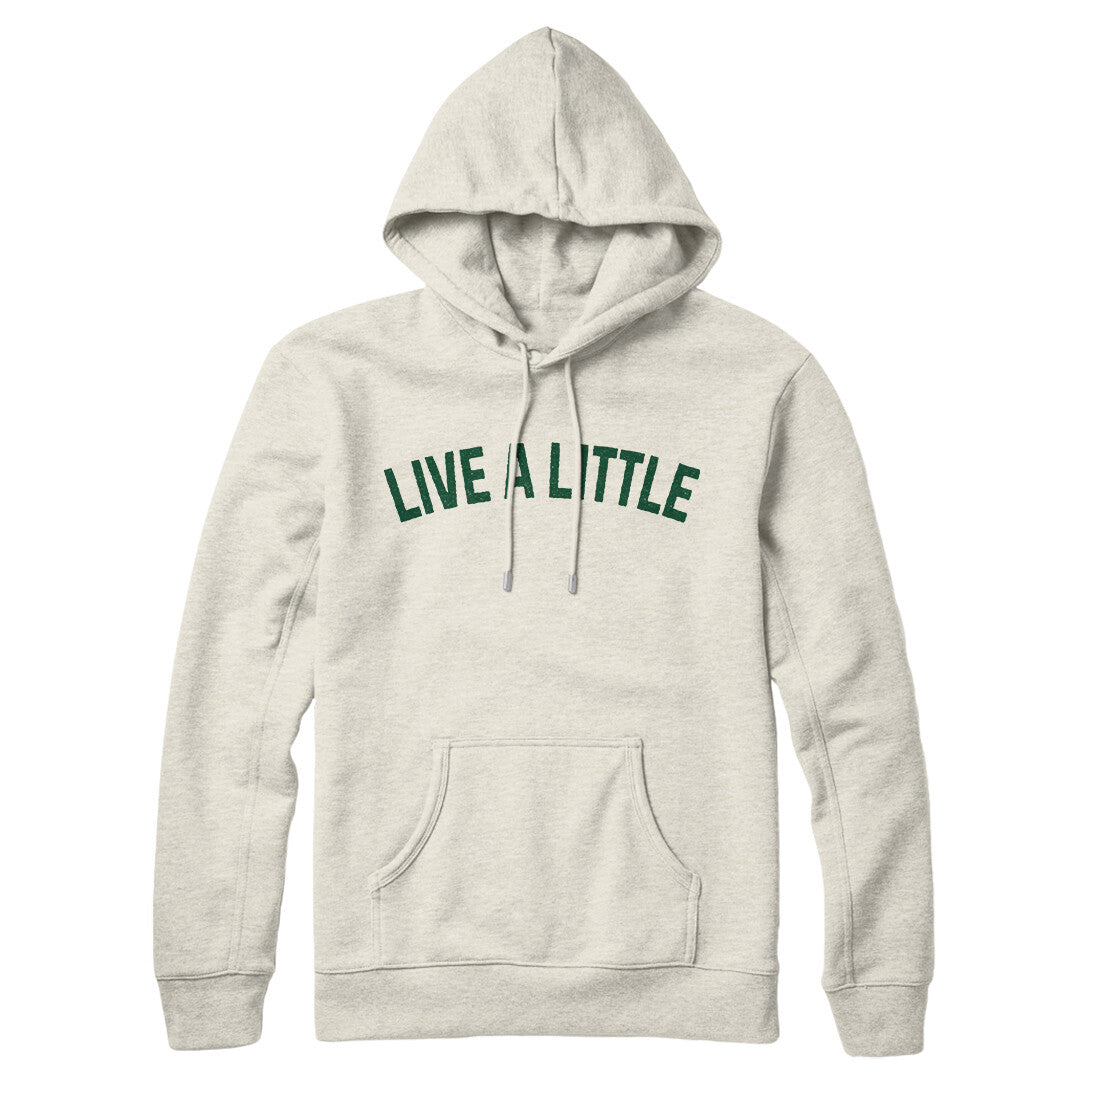 Live a Little in Heather Oatmeal Color